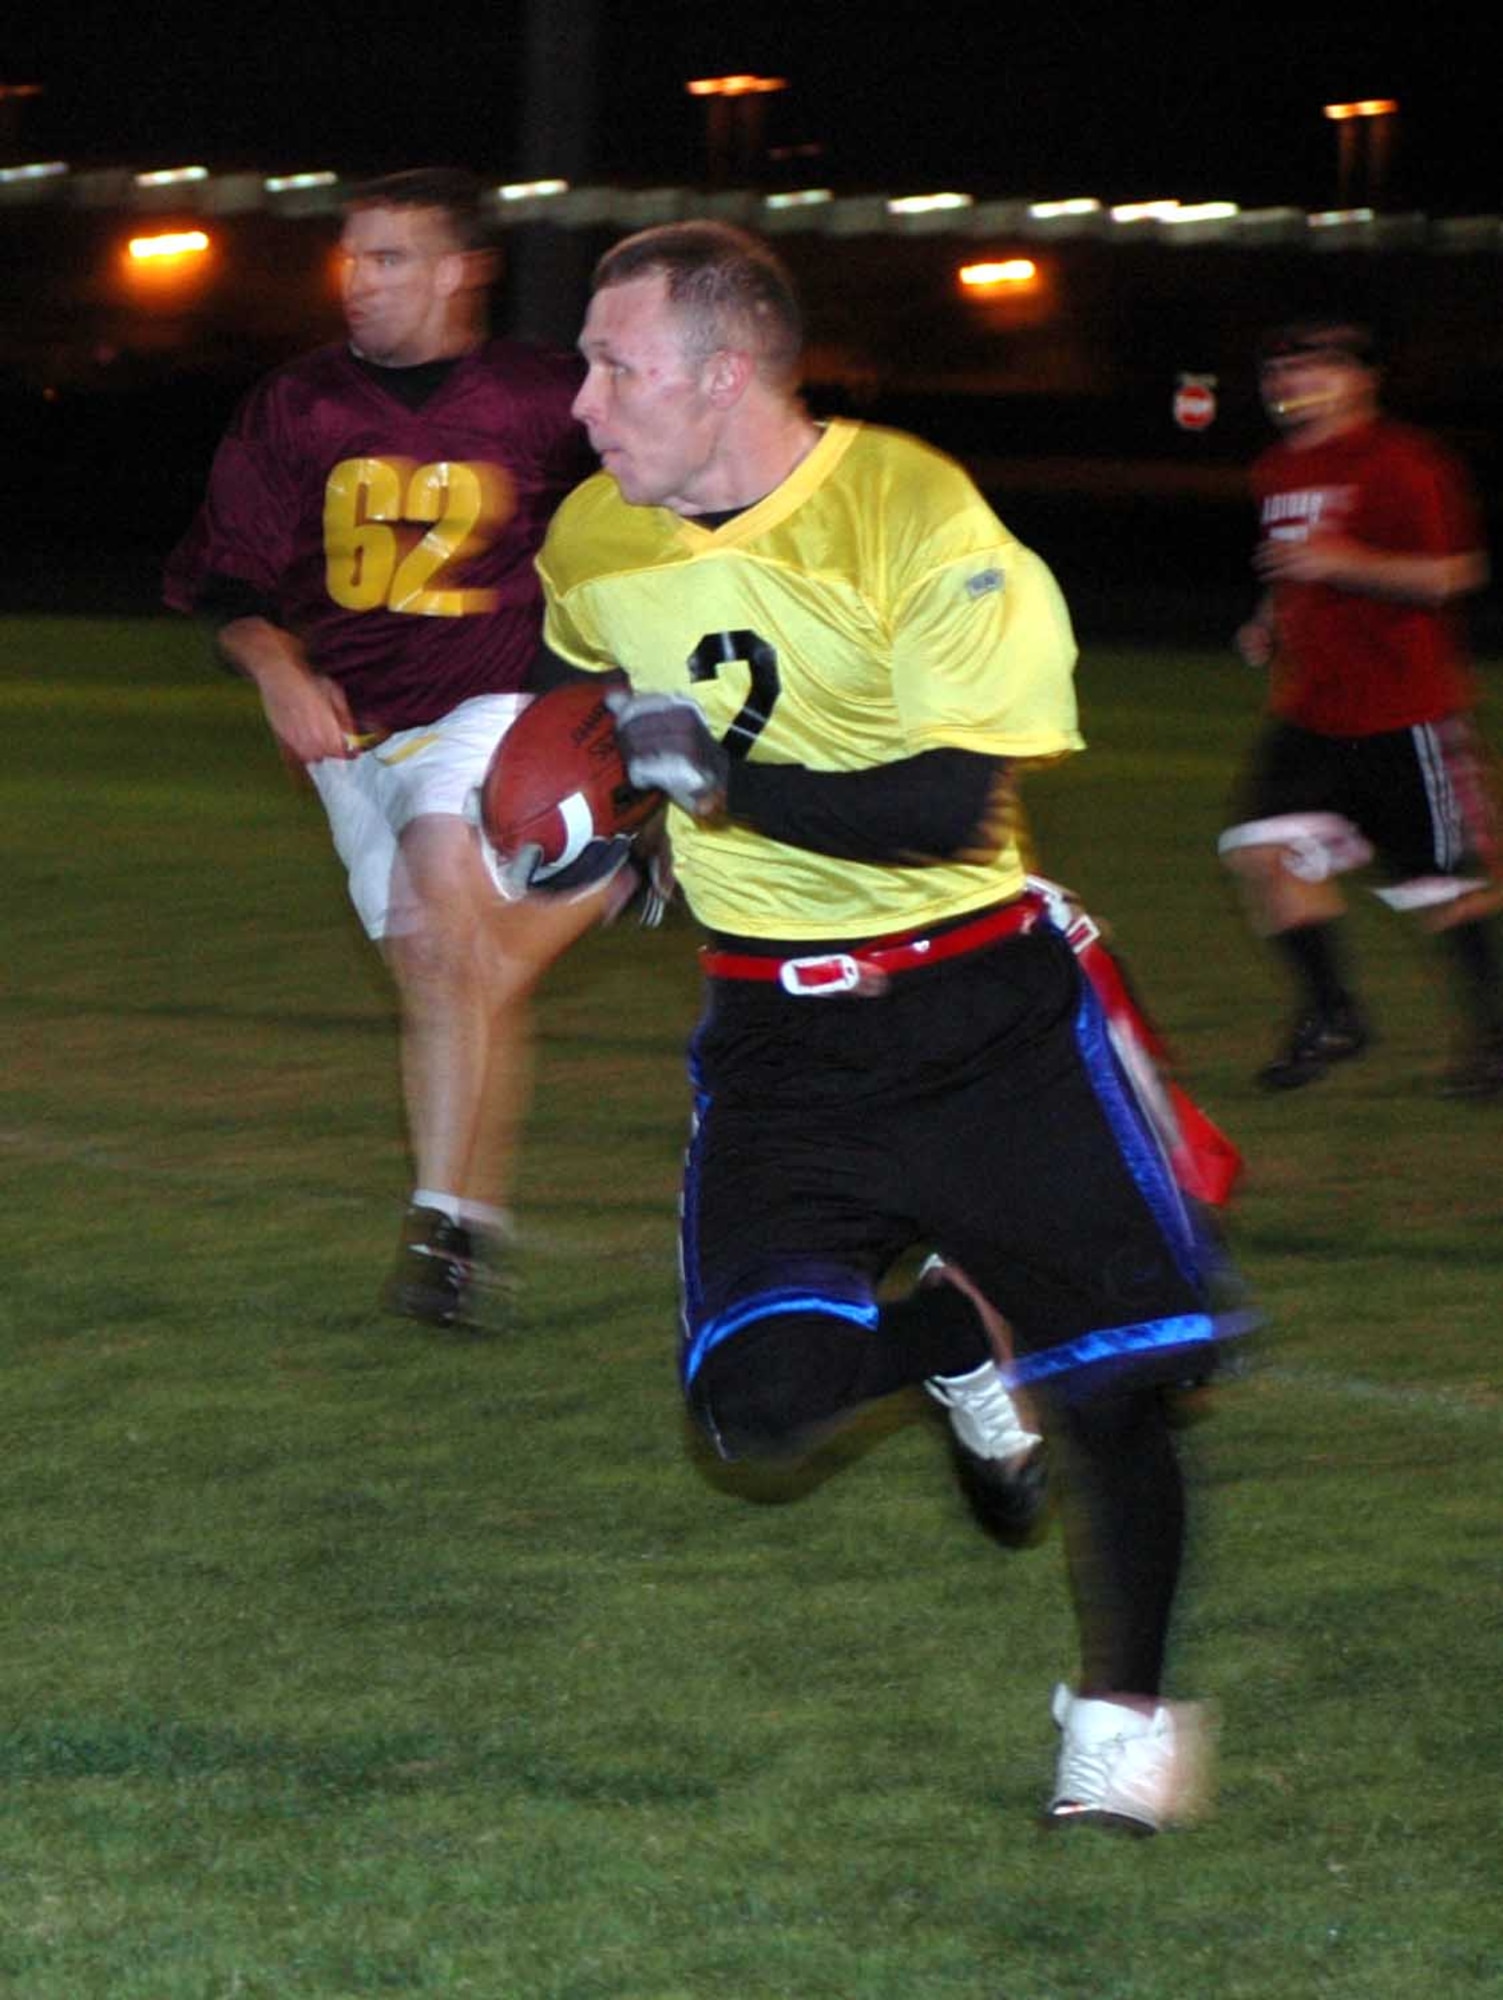 Max Briggs, Travis Red All-Stars’ quarterback, evades defenders on his way to a 25-yard gain during the Intramural Flag Football All-Star Classic Nov. 20.  Briggs threw for 100 yards, two touchdowns and had three interceptions. The Red All-Stars defeated the Gold All-Stars 14-12. (U.S. Air Force photo/Staff Sgt. Candy Knight)